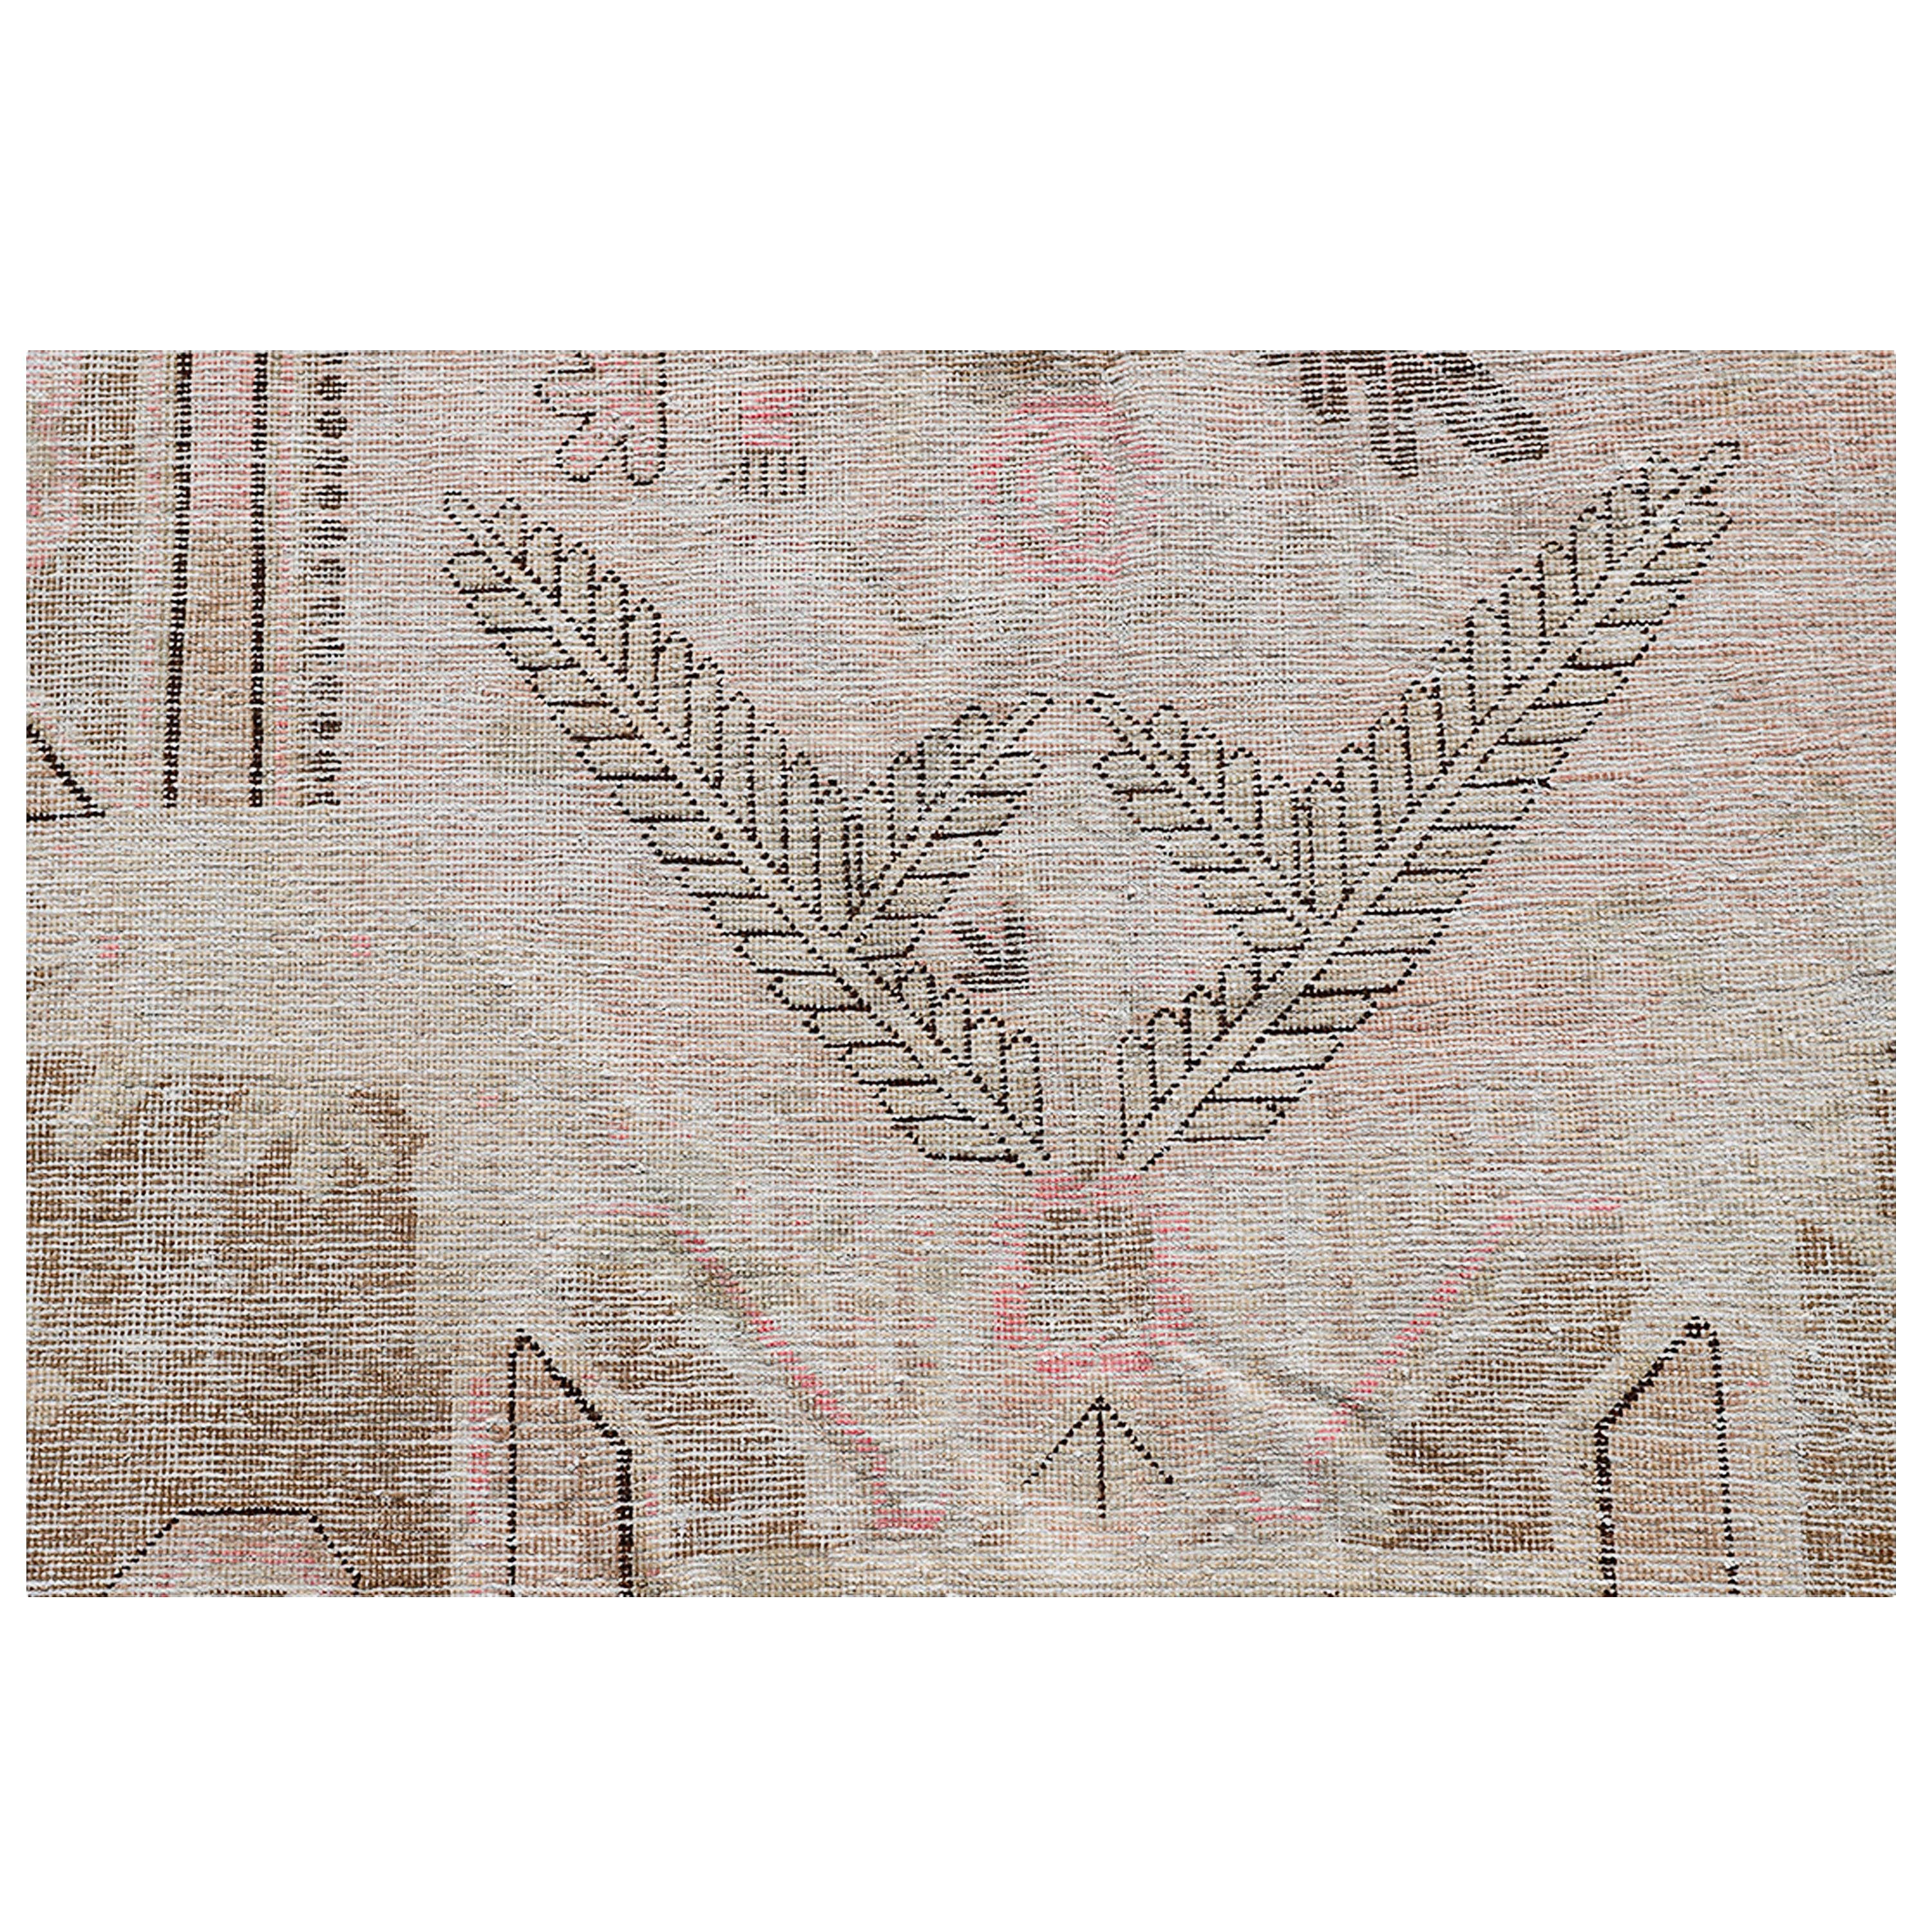 Sourced from the ancient Silk Road to bring a genuine one-of-a-kind rug to your home, this Beige and Pink Vintage Wool Cotton Blend Rug - 5'5